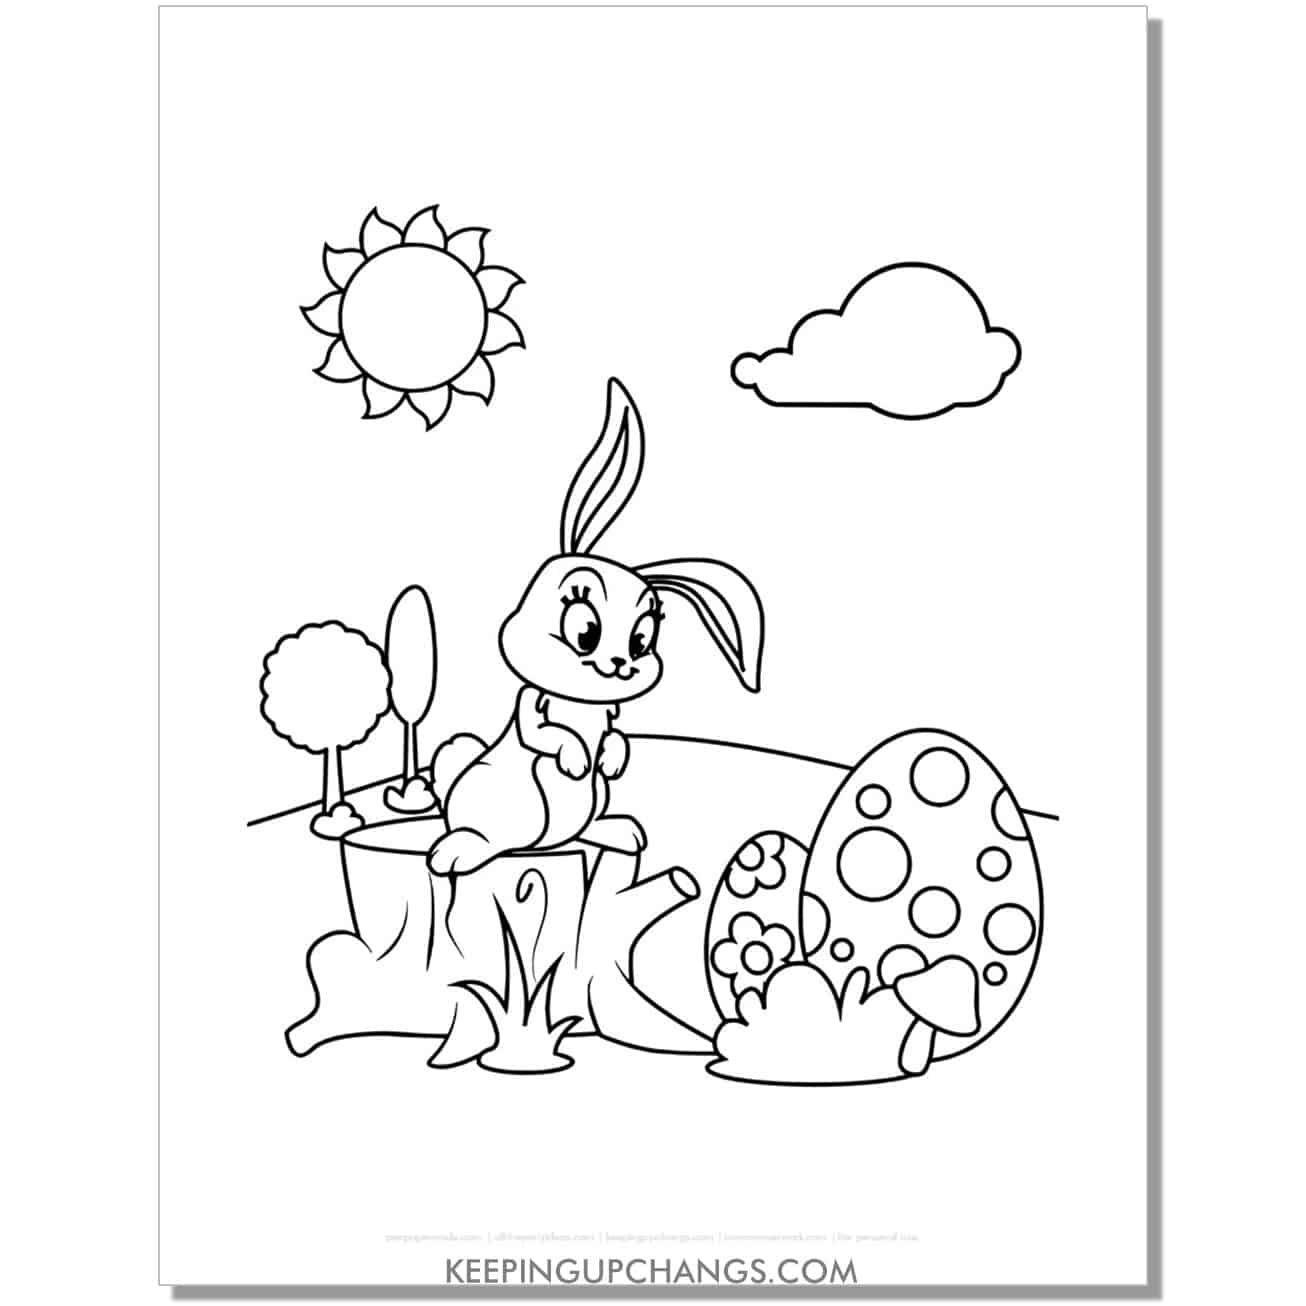 cute easter bunny sitting on tree stump coloring page, sheet.